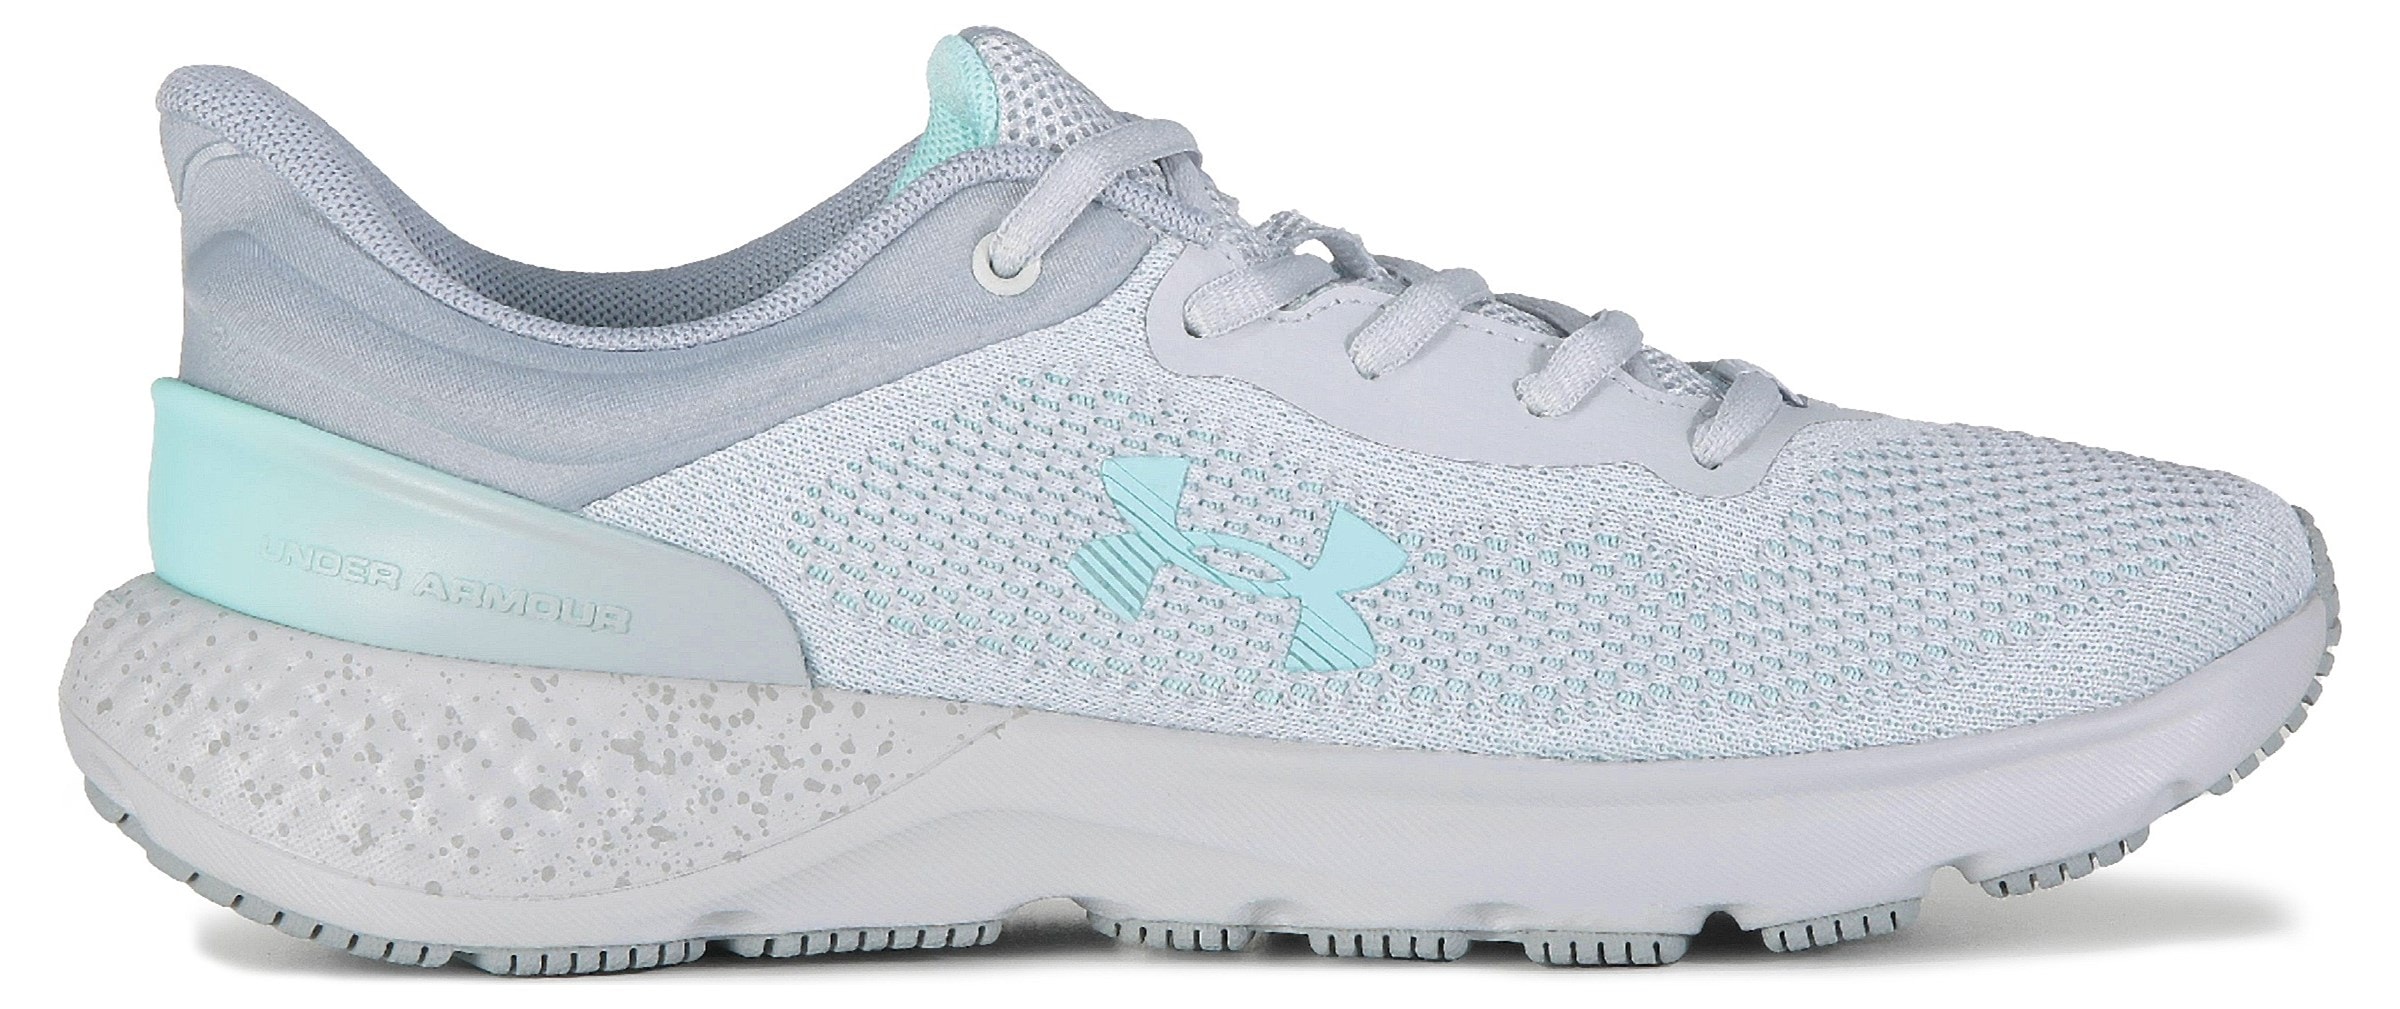 Under Armour Women's Charged Escape 4 Knit Running Shoe